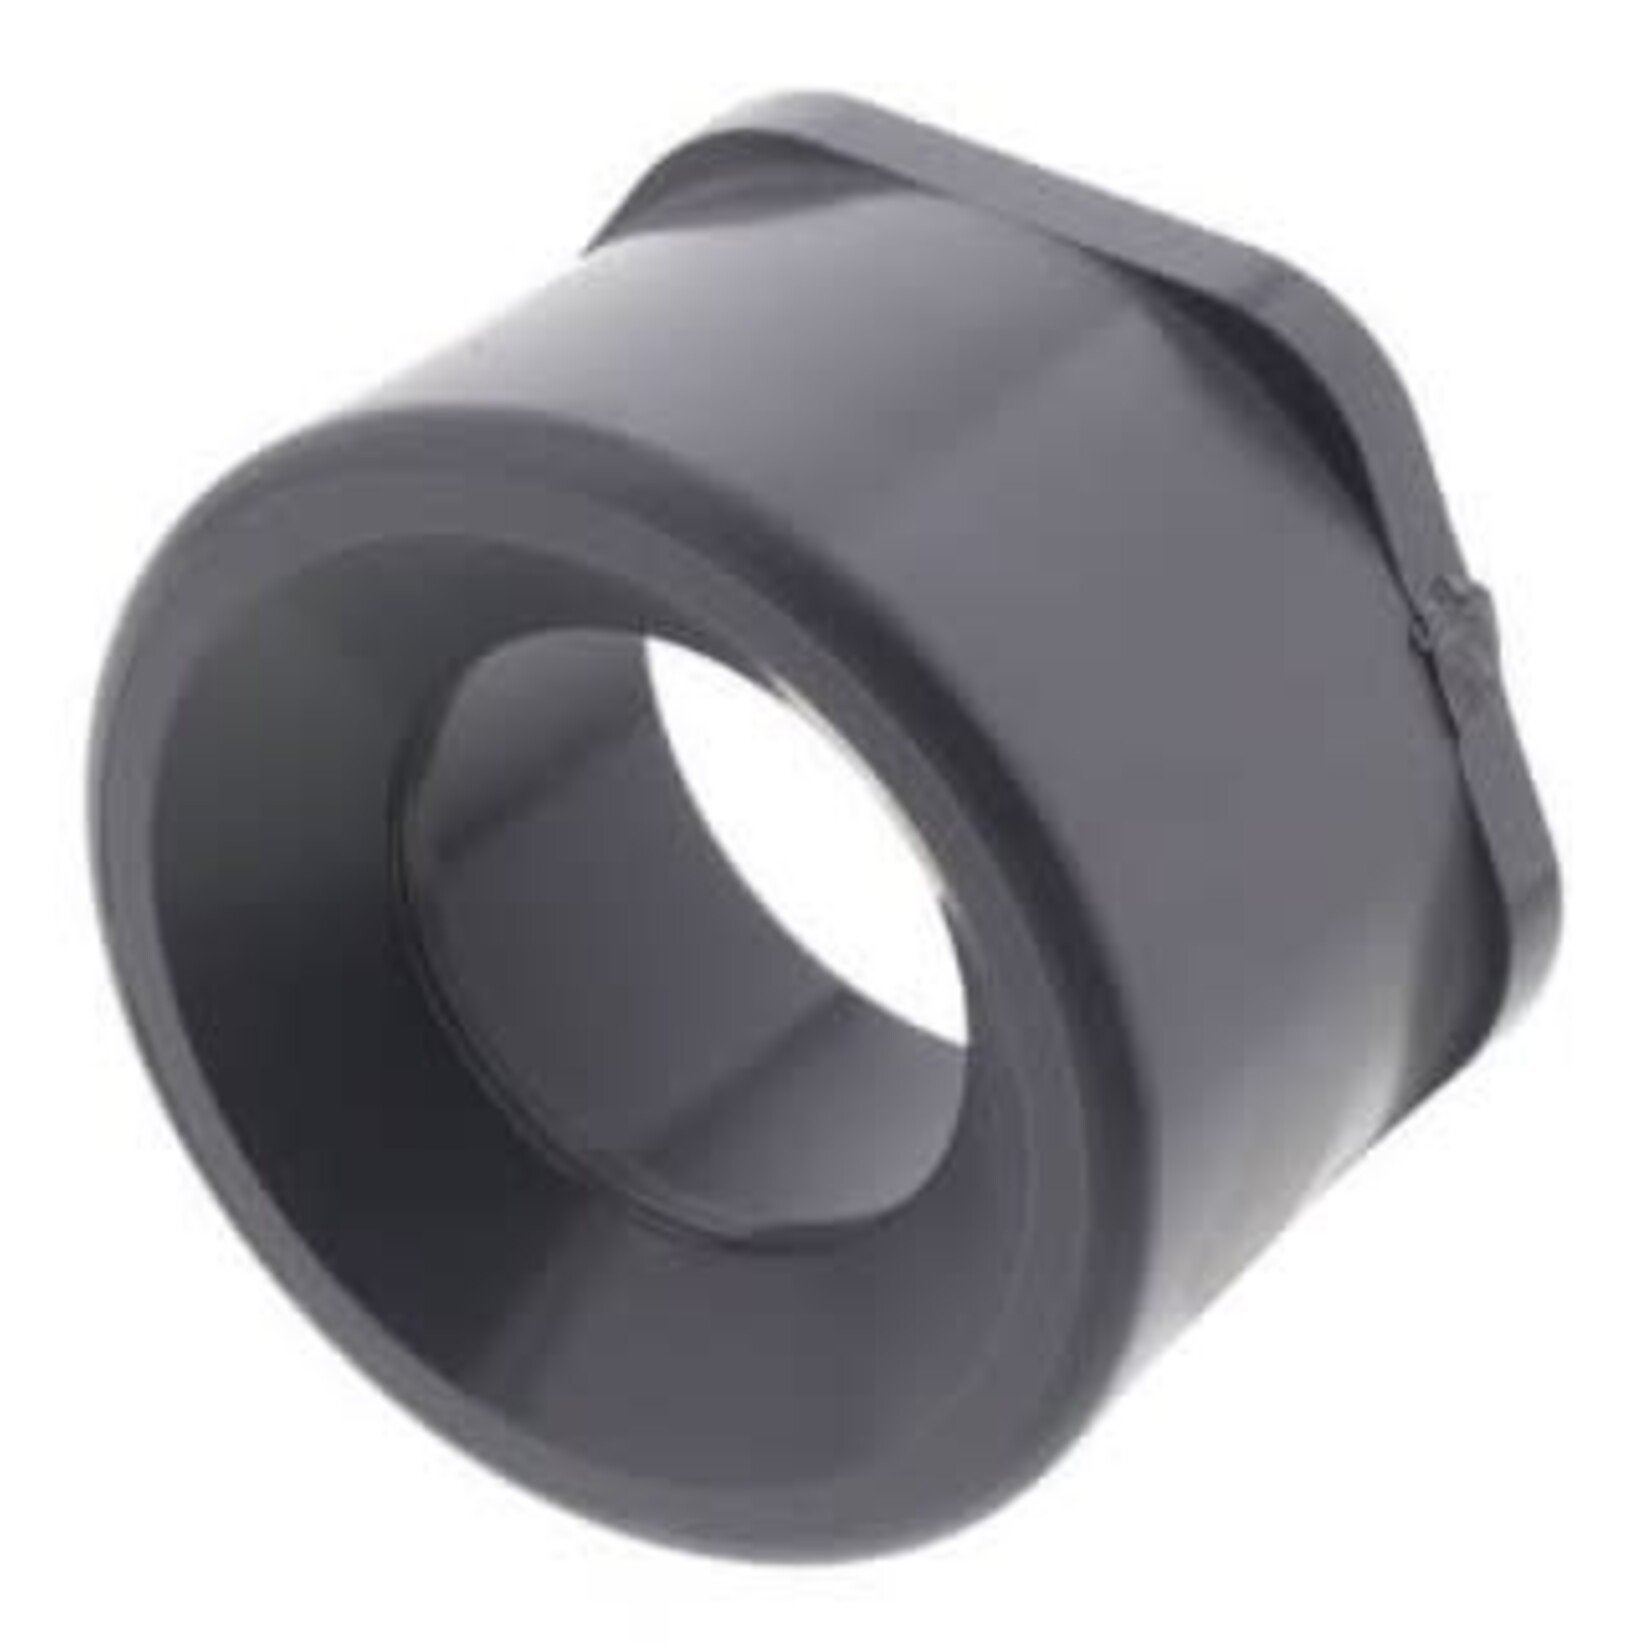 SPEARS 3 IN X 3/4 IN CPVC SCHEDULE 80 FLUSH STYLE REDUCER BUSHING